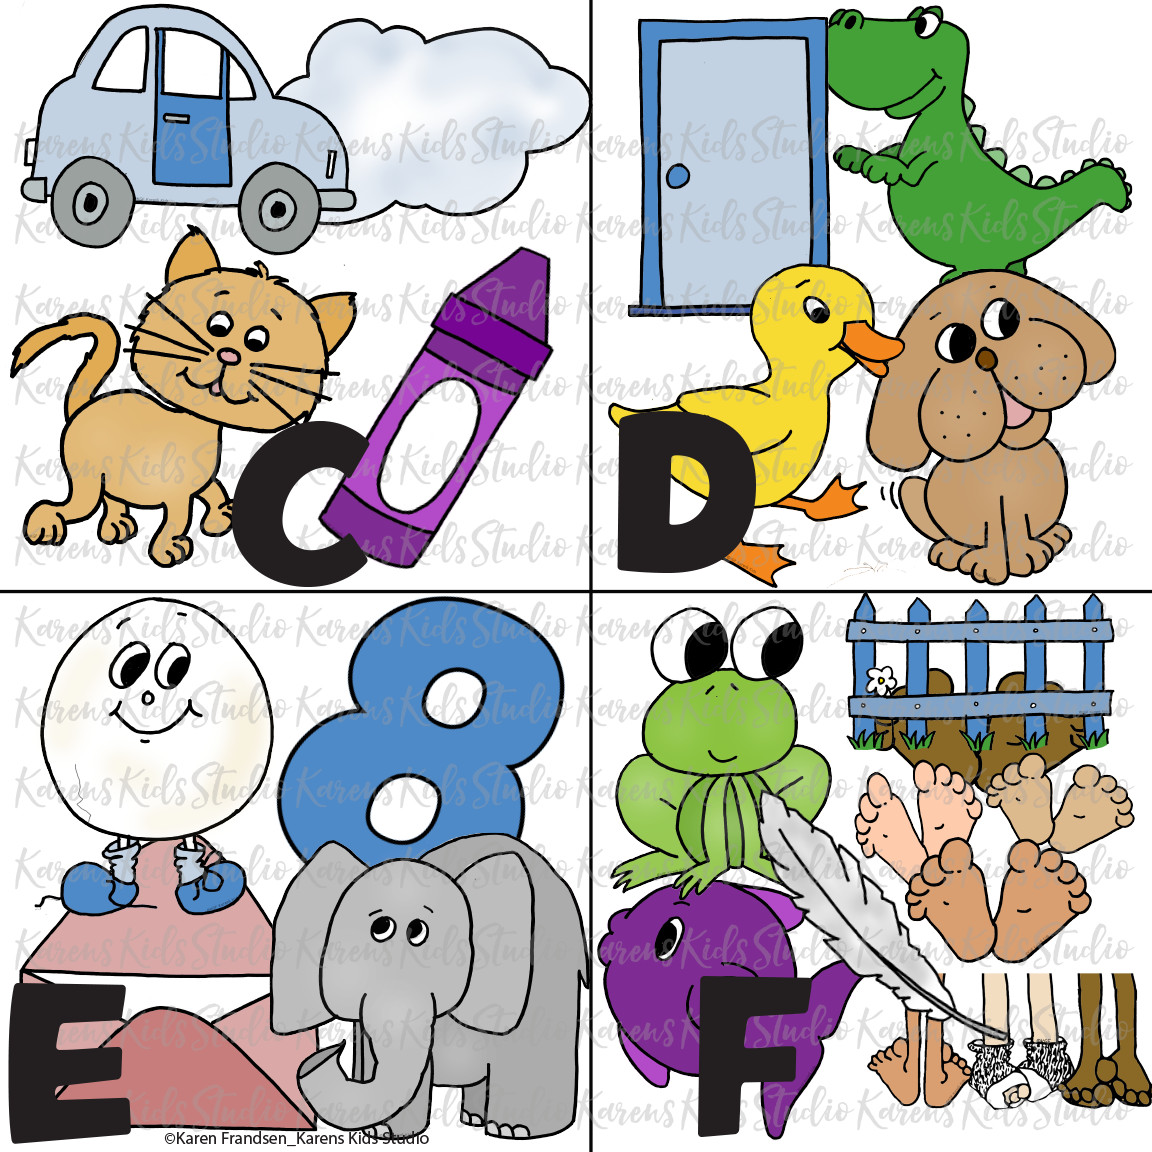 4 boxes each with a black letter; C, D, E, F and large color pictures that begin with that letter. C cat, car, cloud, crayon. D duck, dinosaur, dog, door. E egg, eight, elephant, envelope.  F frog, fence, feet, fish.